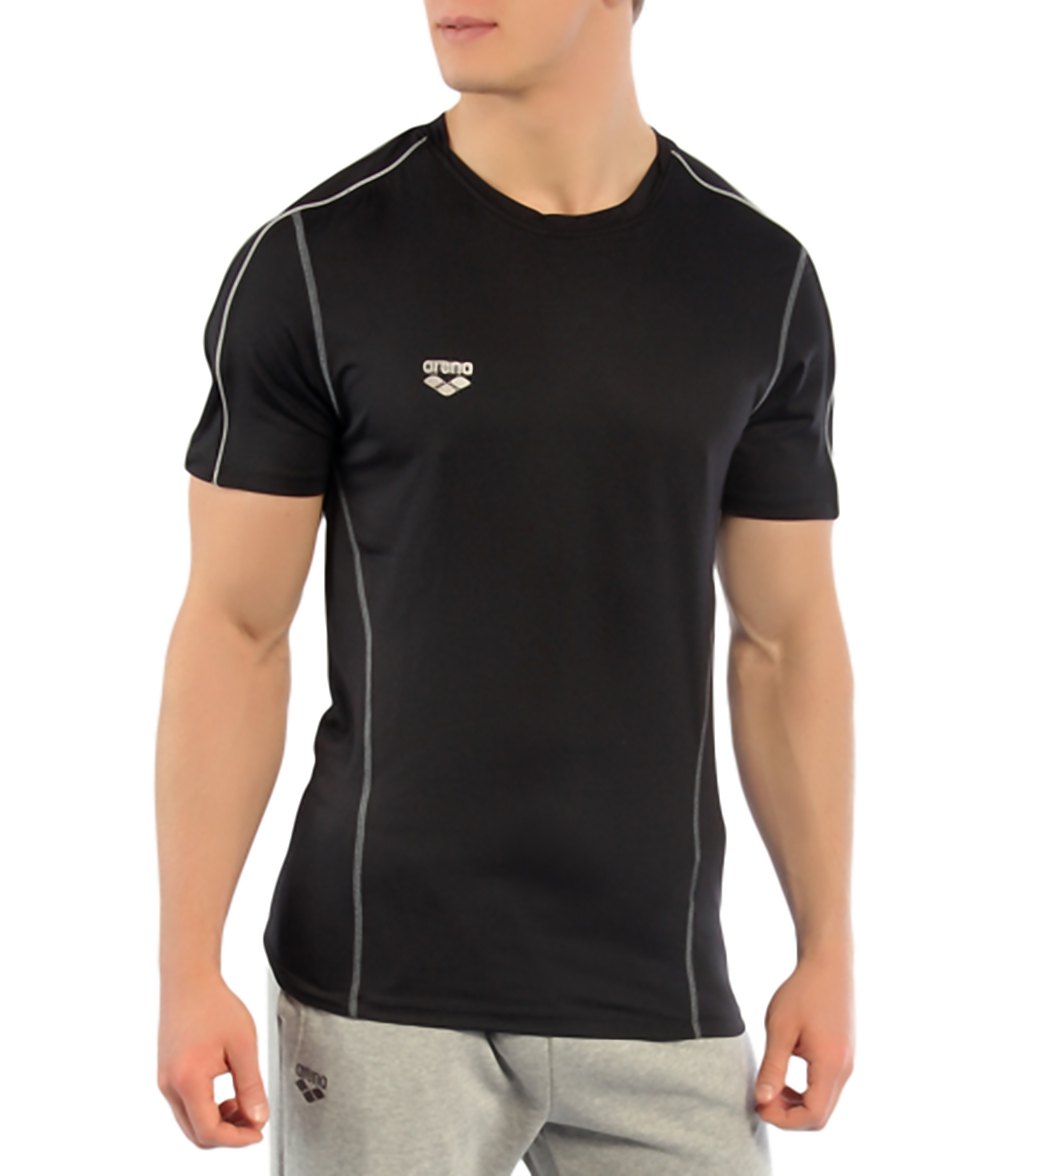 Arena Charge Shirt - Black Small Polyester/Spandex - Swimoutlet.com